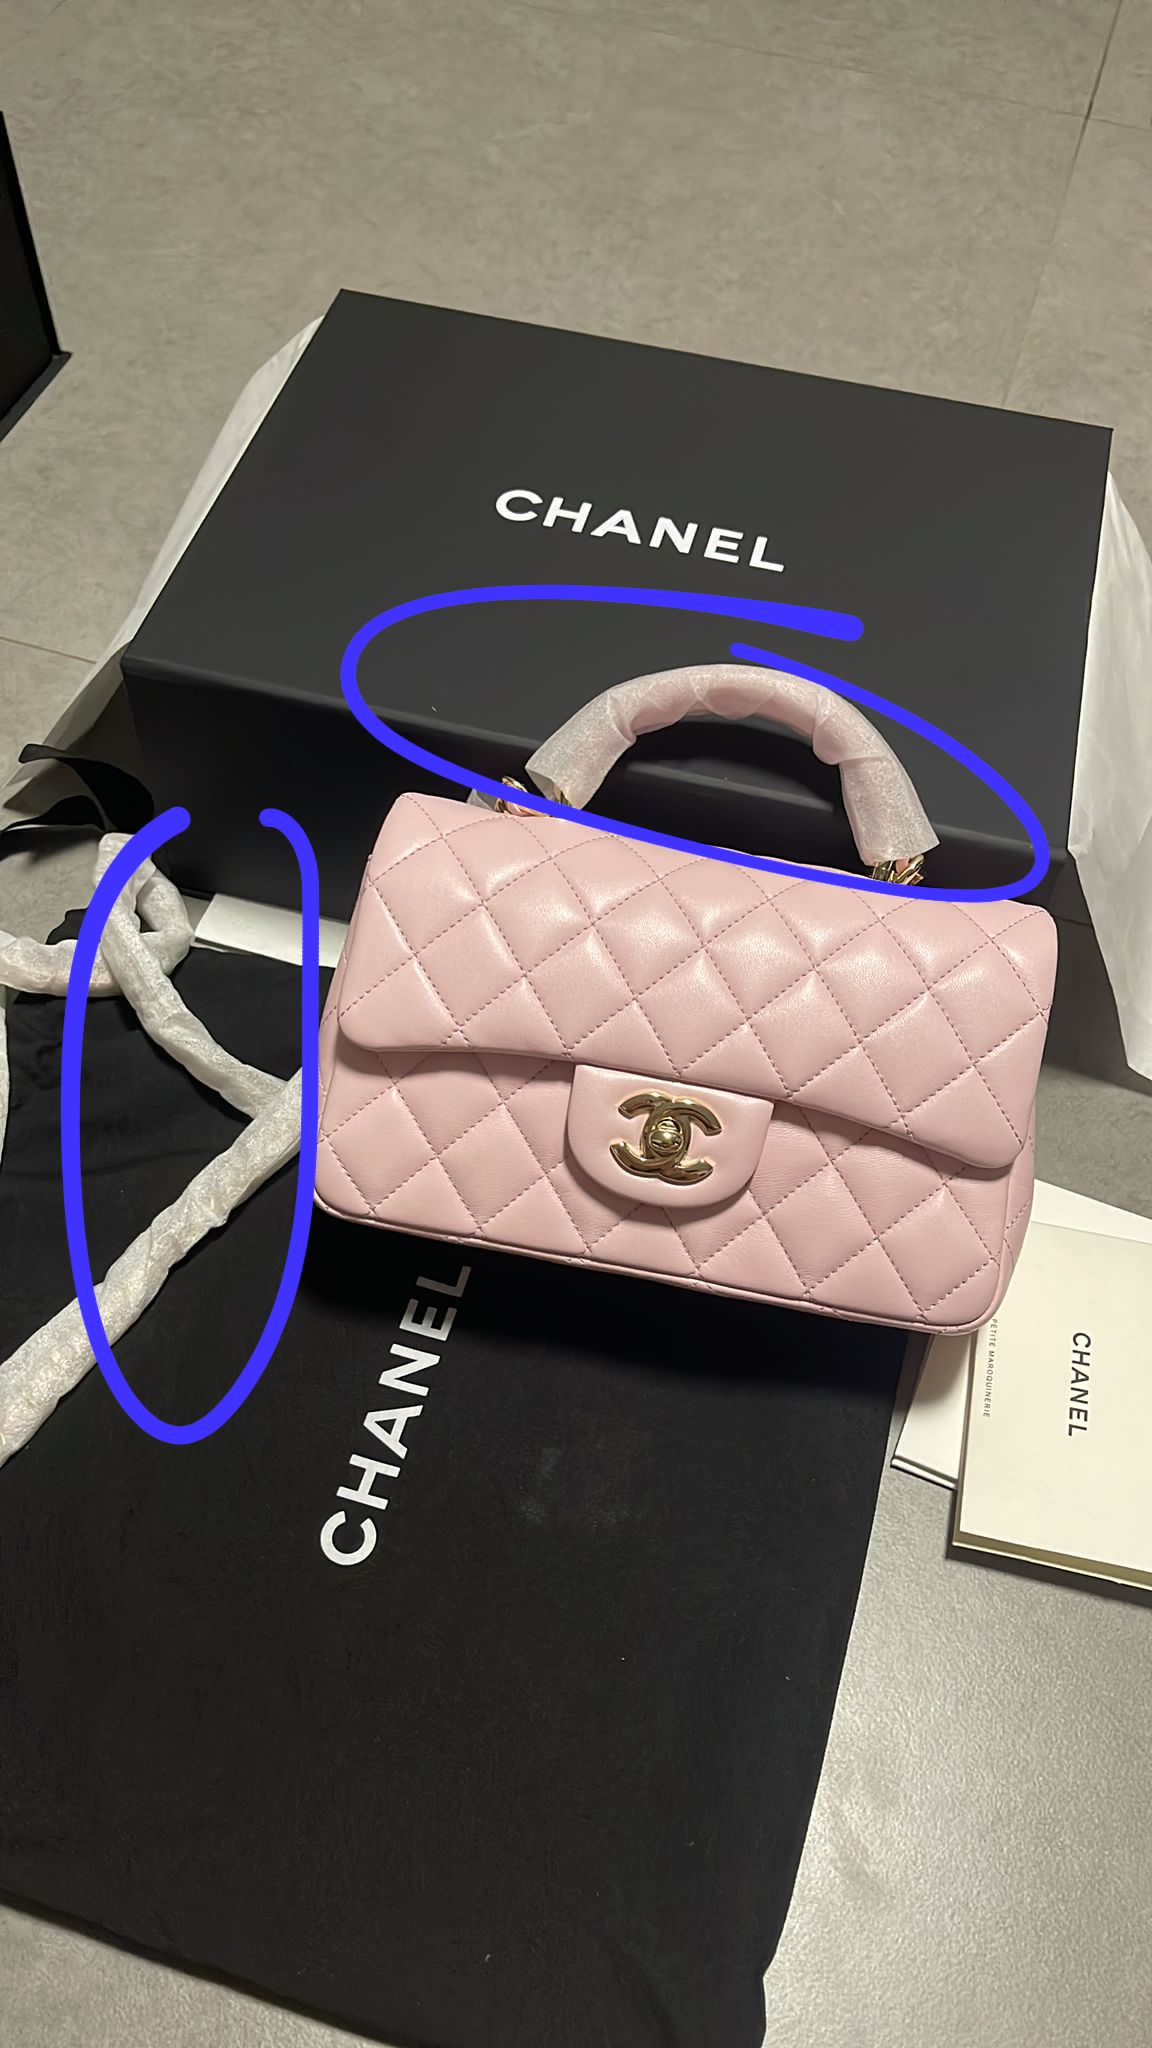 Seller on Instagram allegedly dupes woman into paying $3,600 for a fake  Chanel bag, then ghosts her, Singapore News - AsiaOne